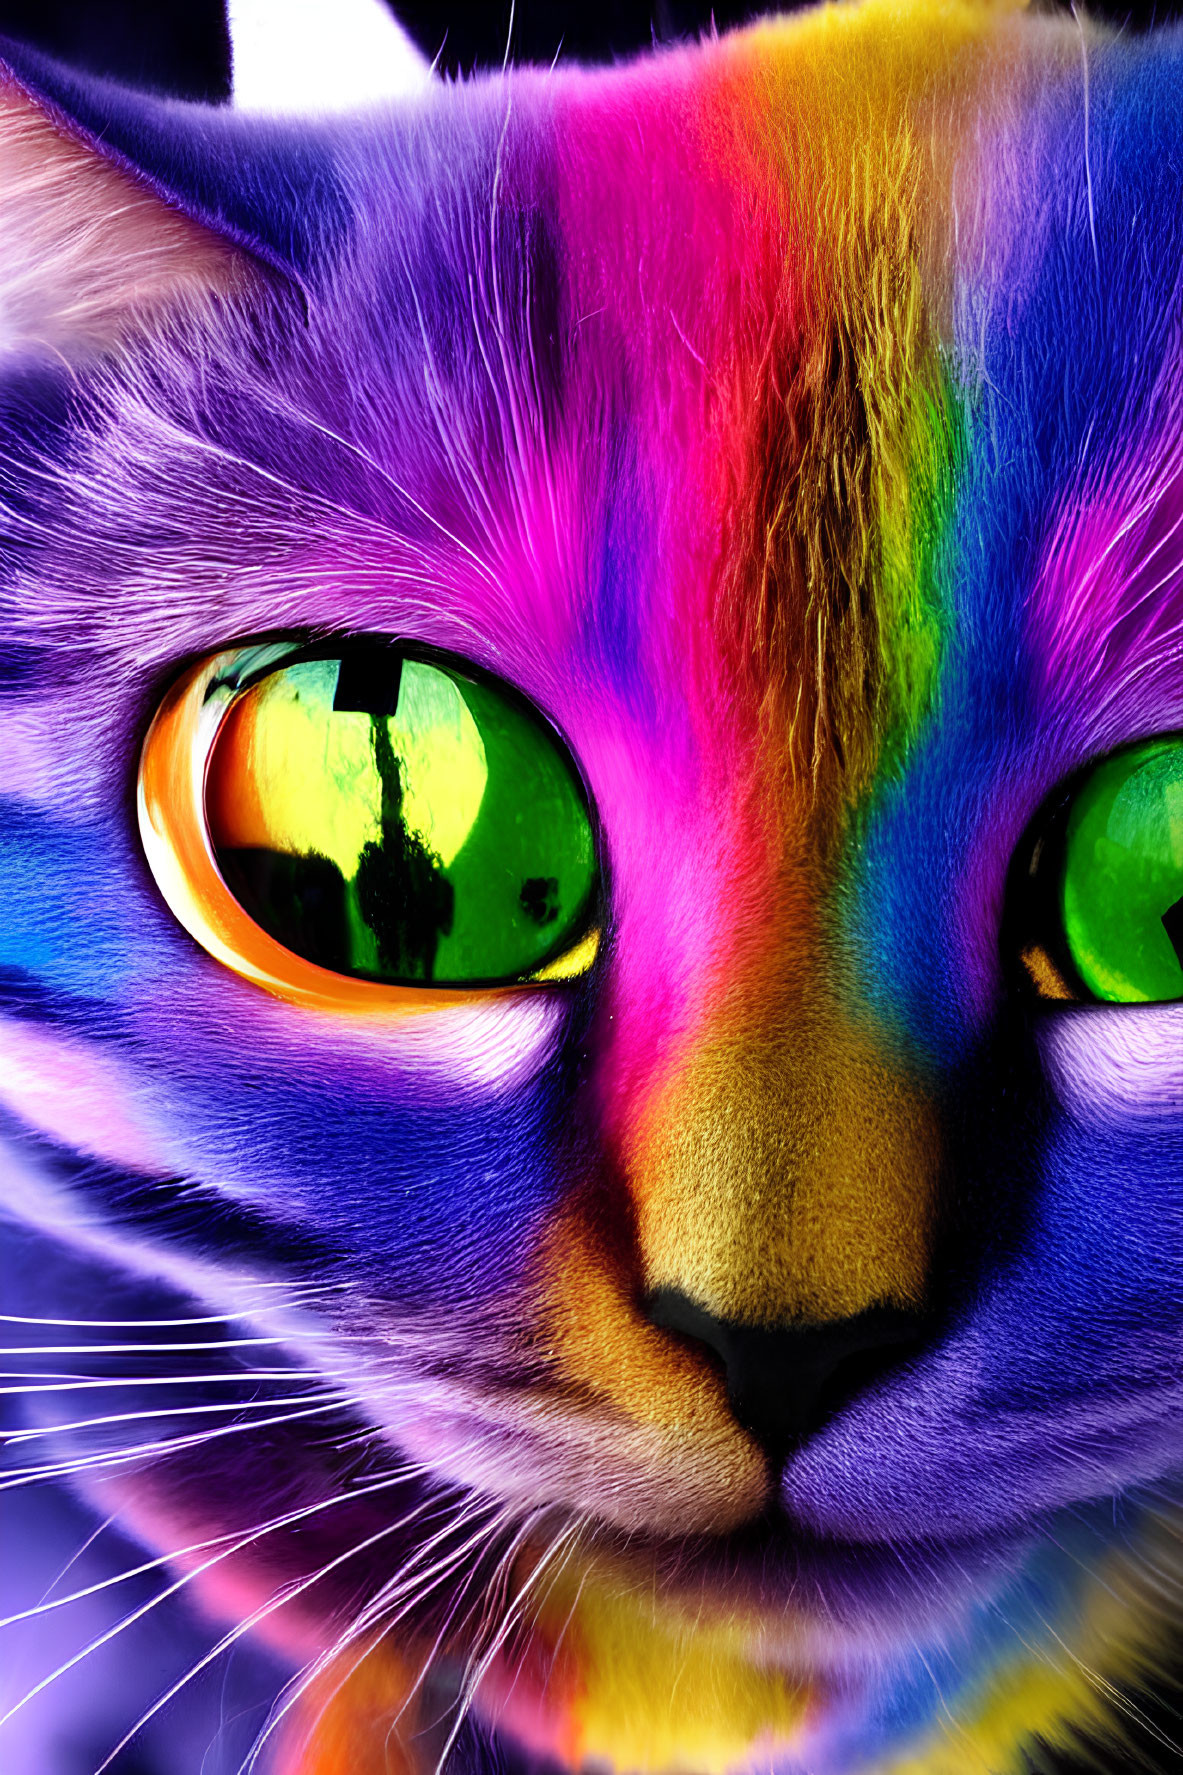 Colorful Close-Up of Cat with Rainbow Fur and Green Eyes in Urban Setting